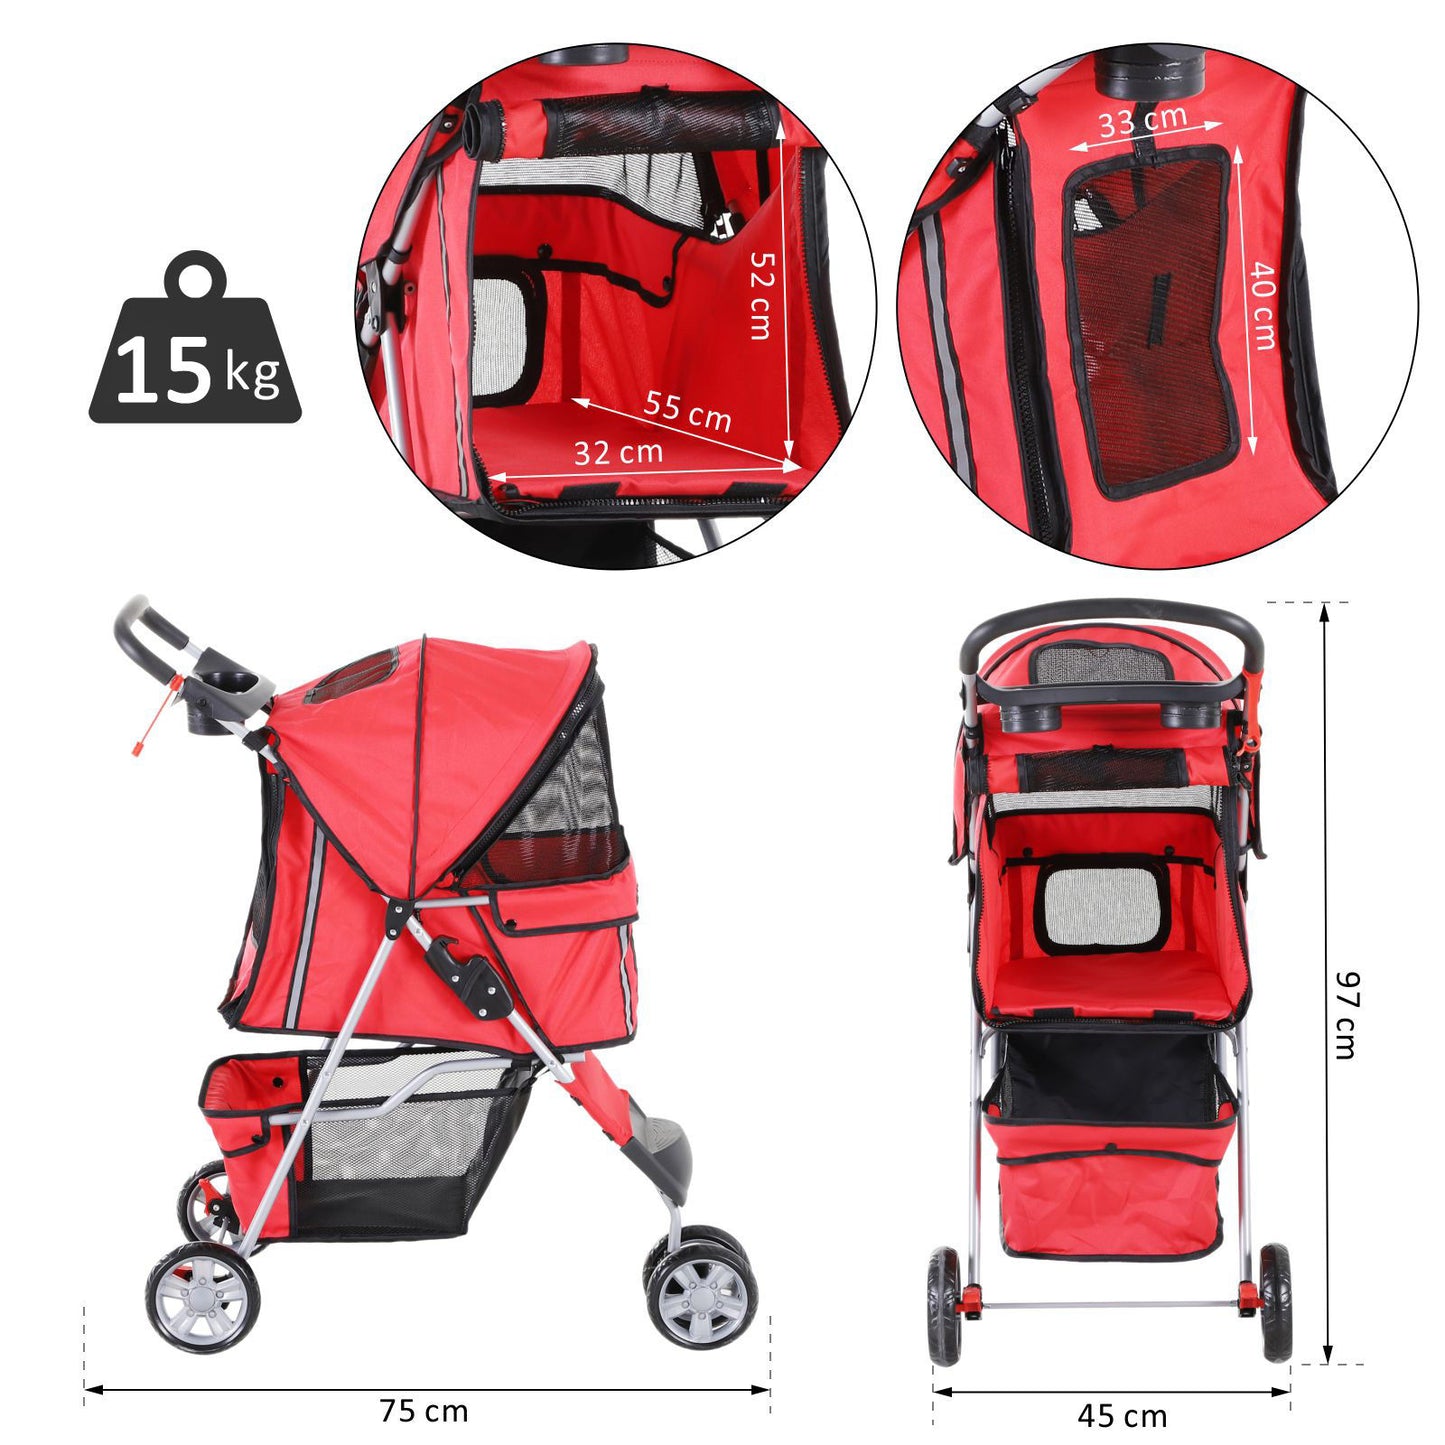 Nancy's The Garden Dog buggy chiens chats multicolore (rouge)